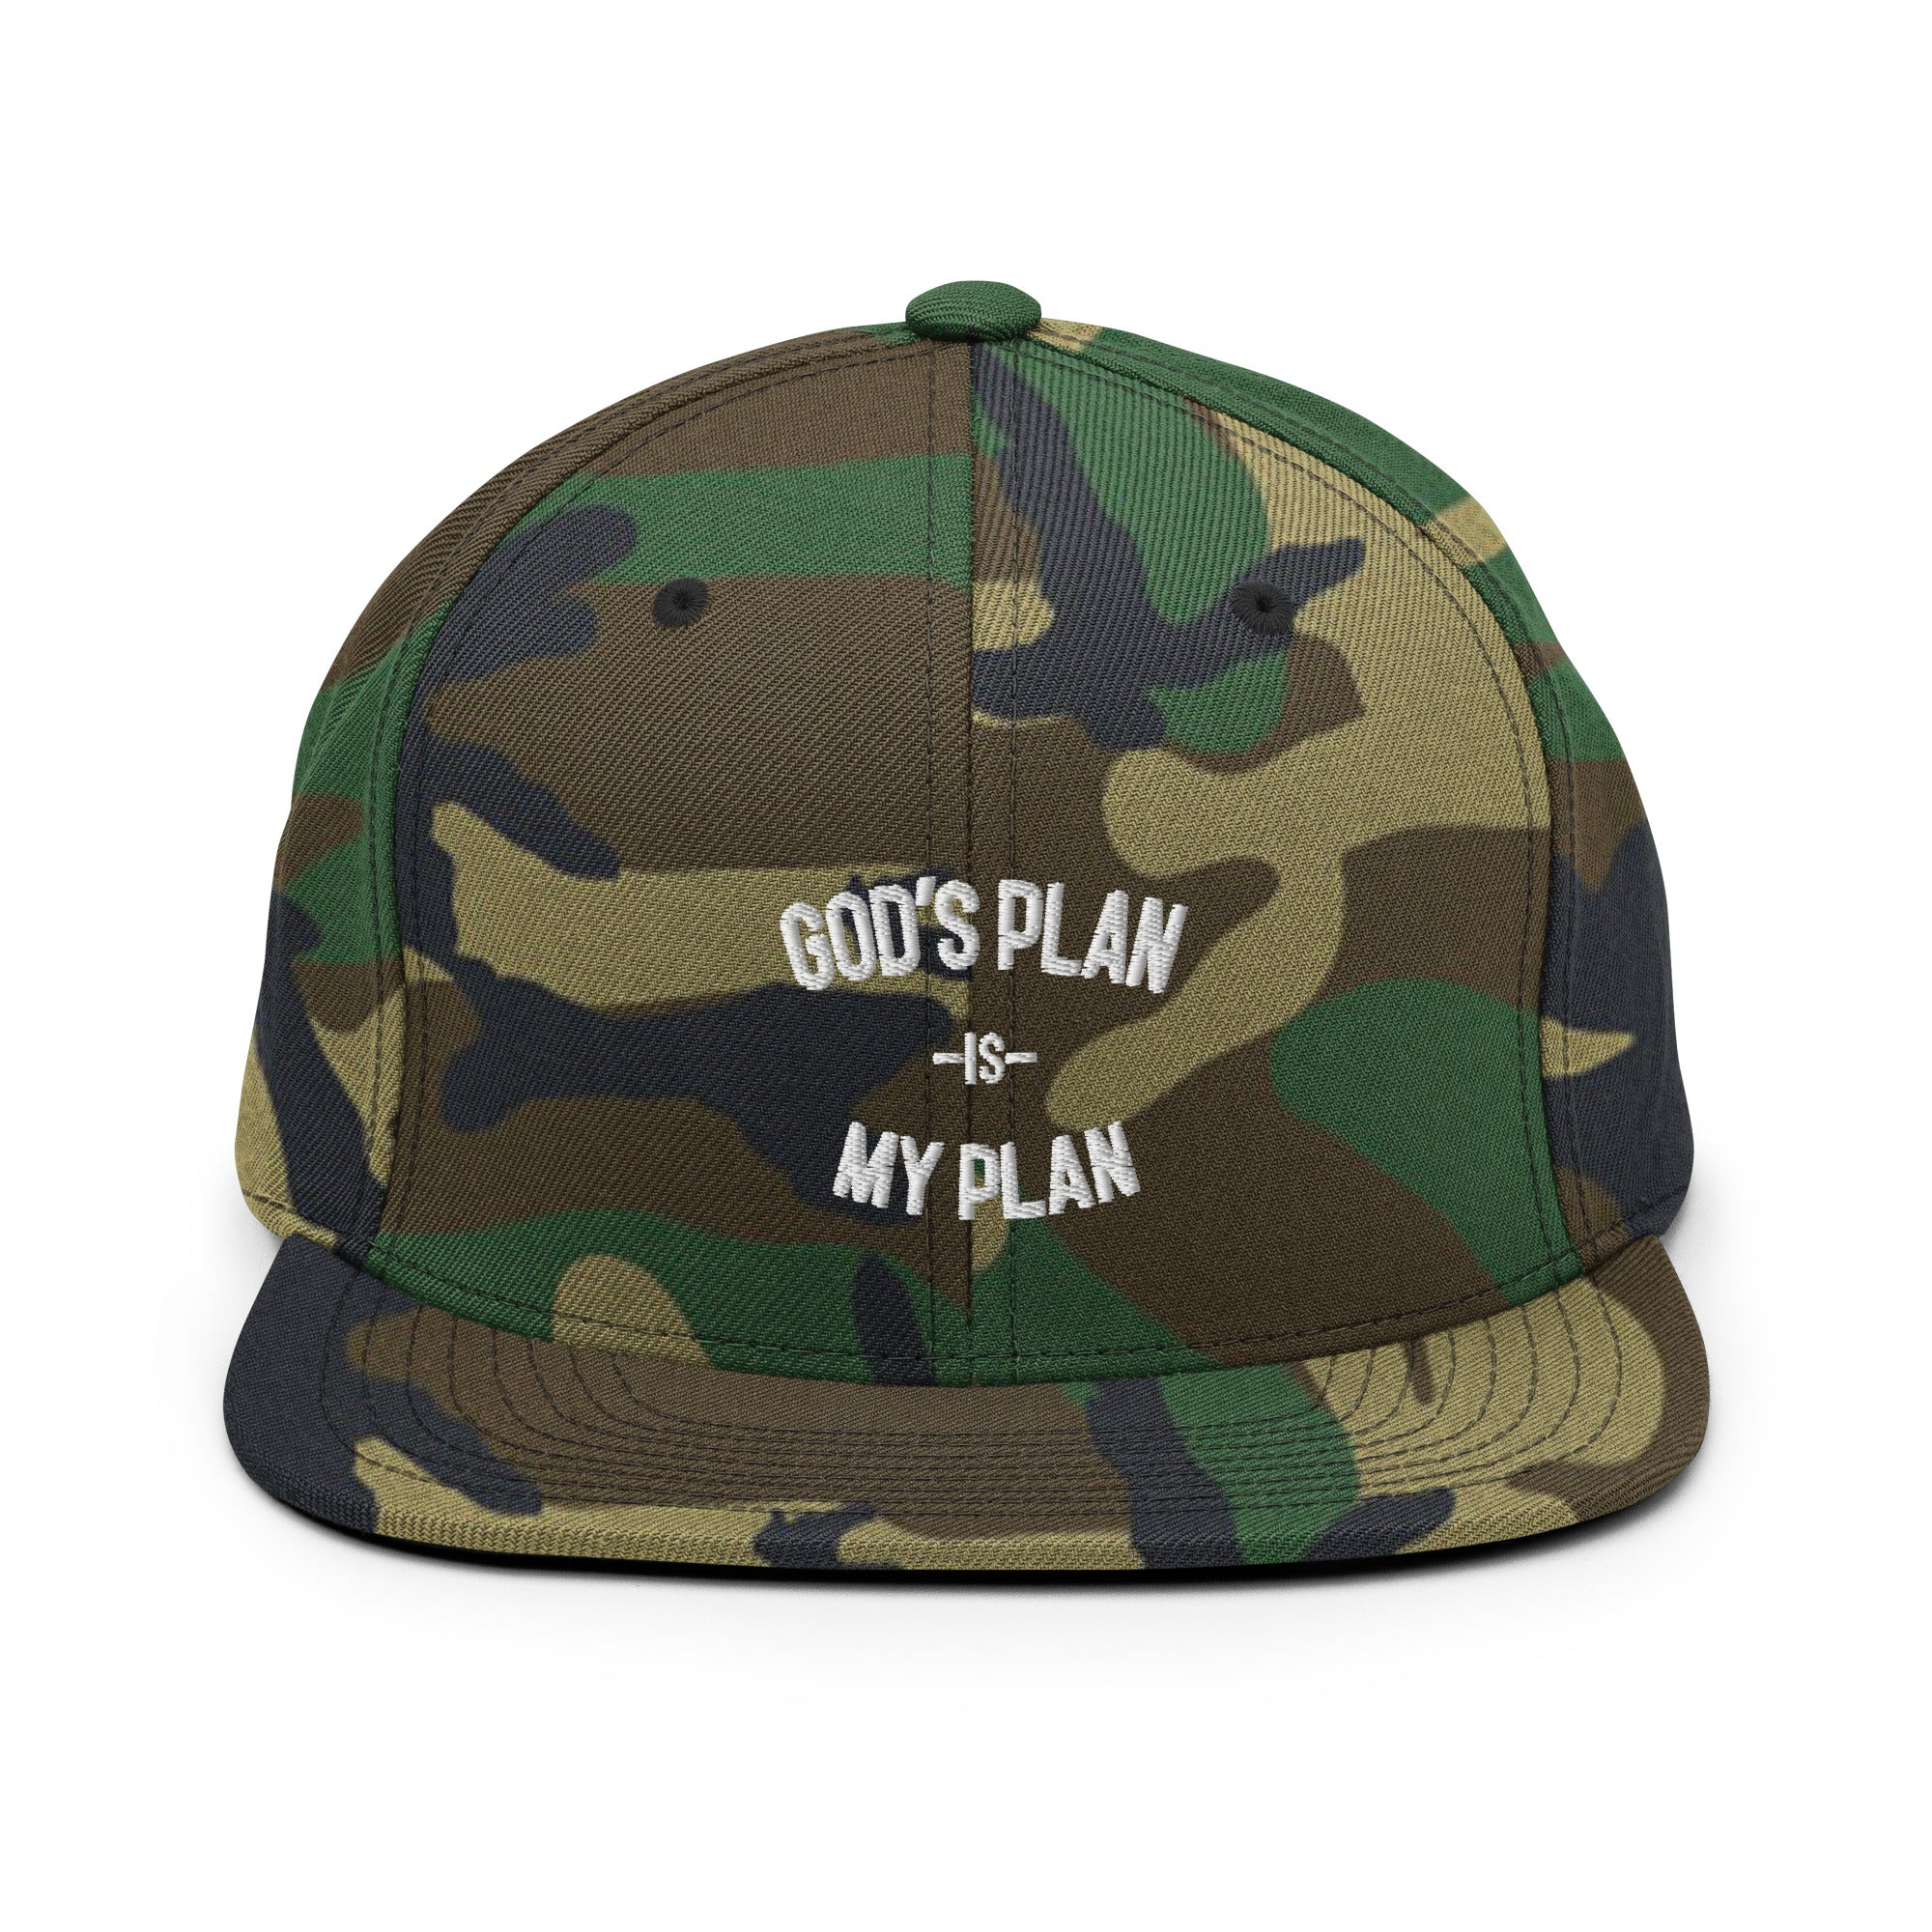 God's Plan My Plan Snapback Hat, Used By God, Used By God Clothing, Christian Apparel, Christian Hats, Christian T-Shirts, Christian Clothing, God Shirts, Christian Sweatshirts, God Clothing, Jesus Hoodie, Jesus Clothes, God Is Dope, Art Of Homage, Red Letter Clothing, Elevated Faith, Active Faith Sports, Beacon Threads, God The Father Apparel